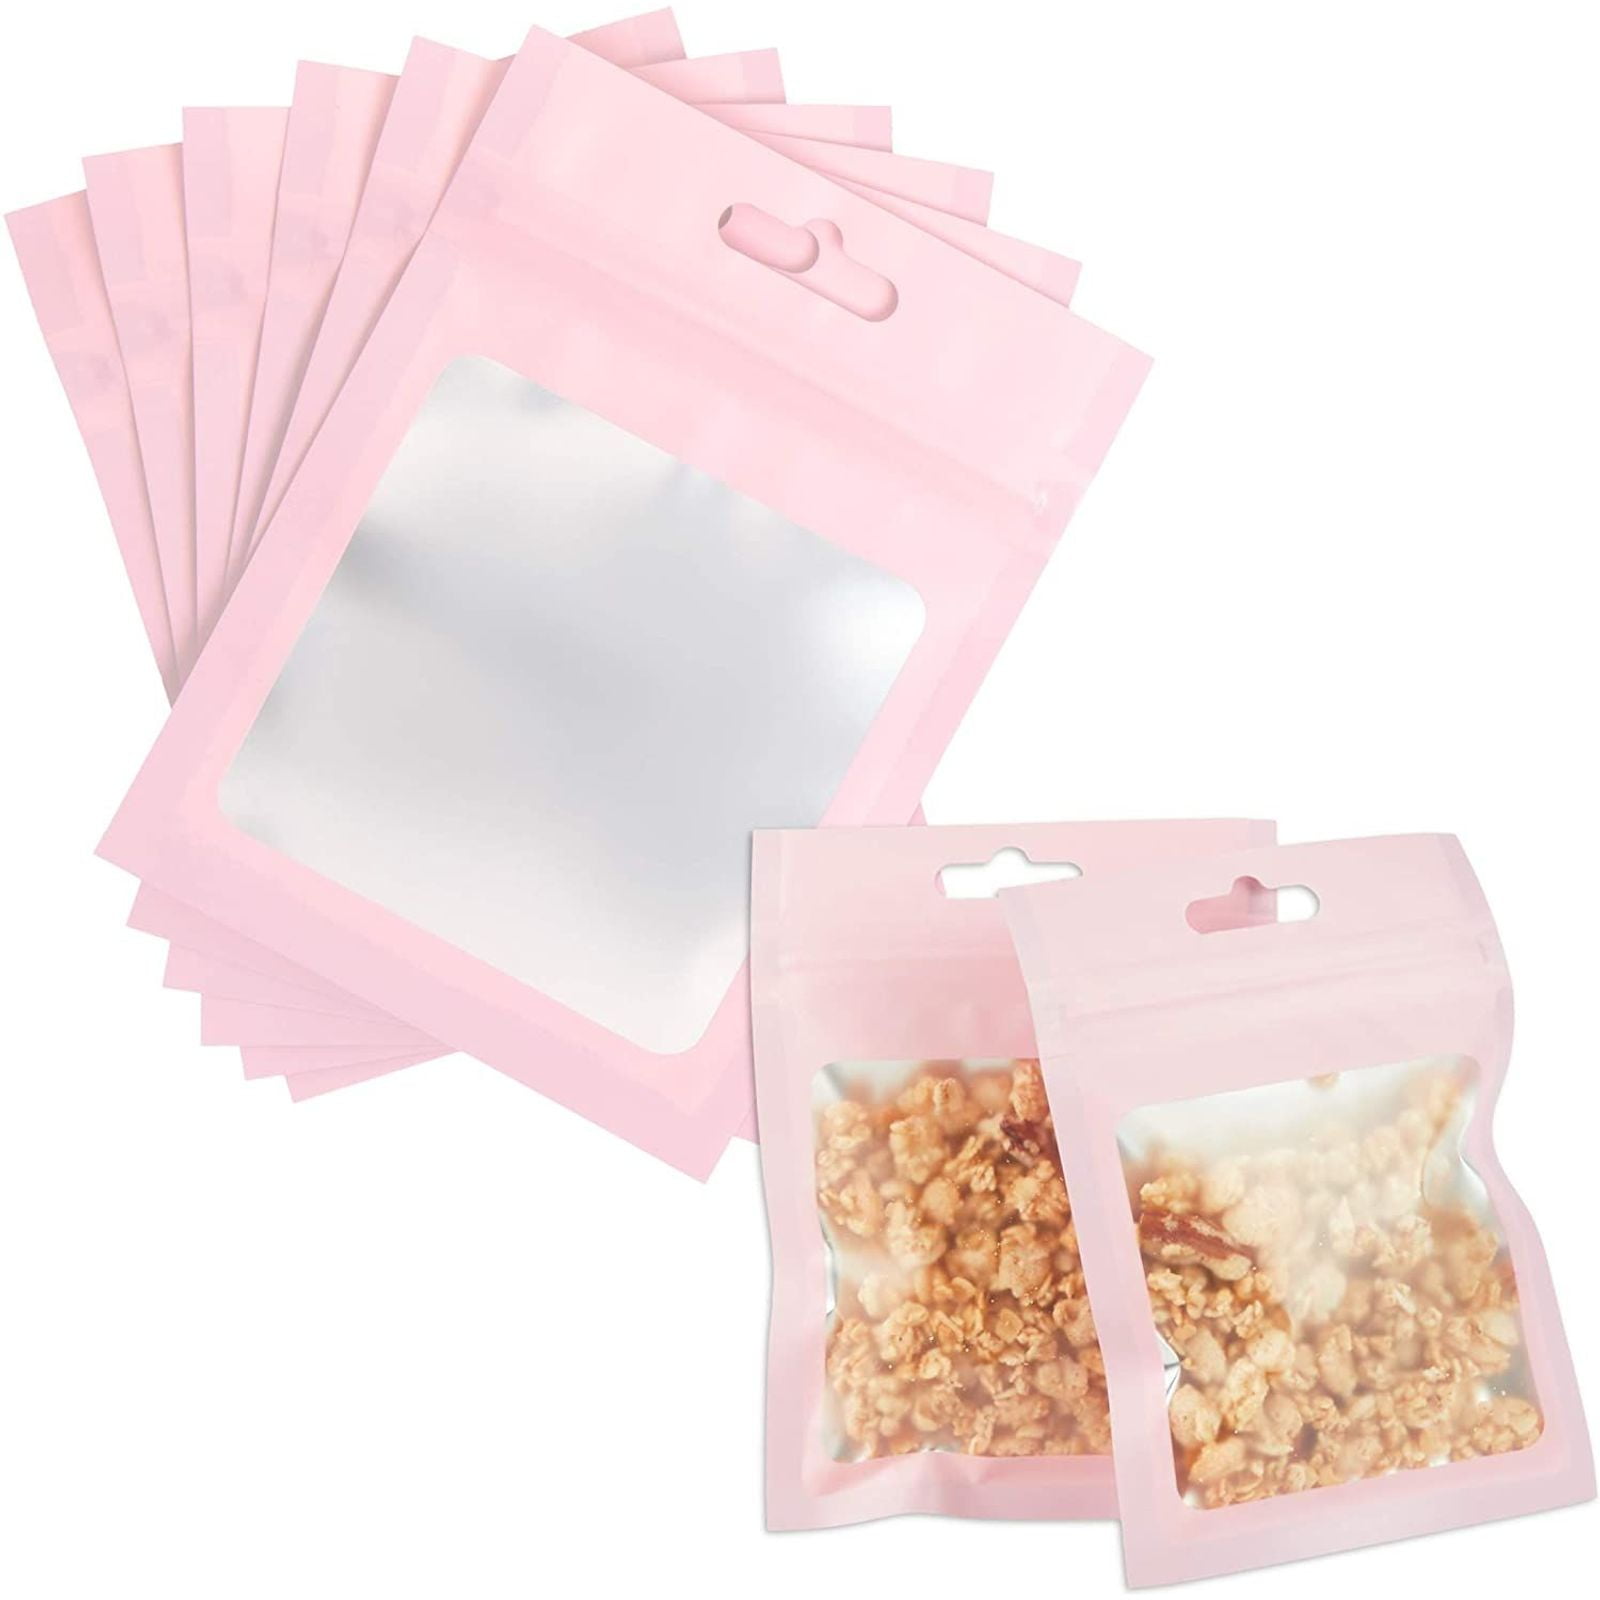 Clear Mylar Self Adhesive Self-Sealing Foil Glitter Packaging Storage Bags 